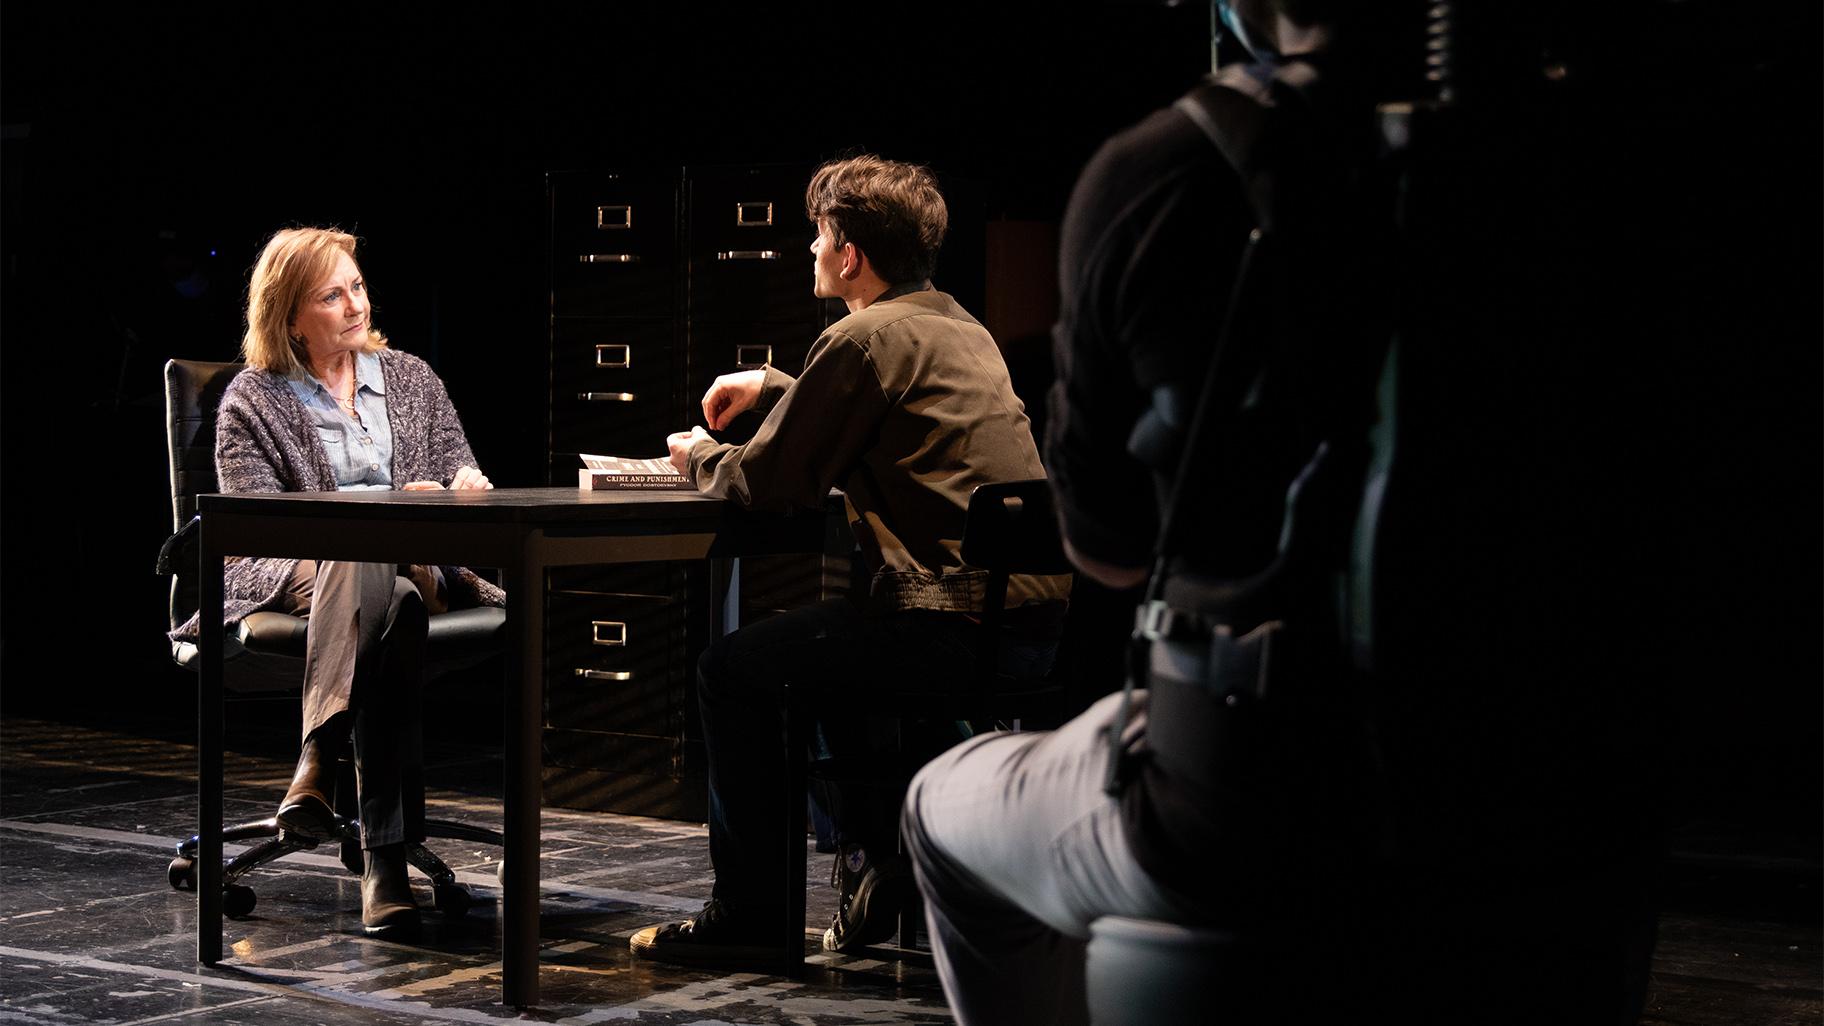 Mary Beth Fisher (Bella) and John Drea (Christopher) in ’The Sound Inside’ by Adam Rapp, directed by Robert Falls at Goodman Theatre (May 13 – 16, 2021) (credit Cody Nieset)